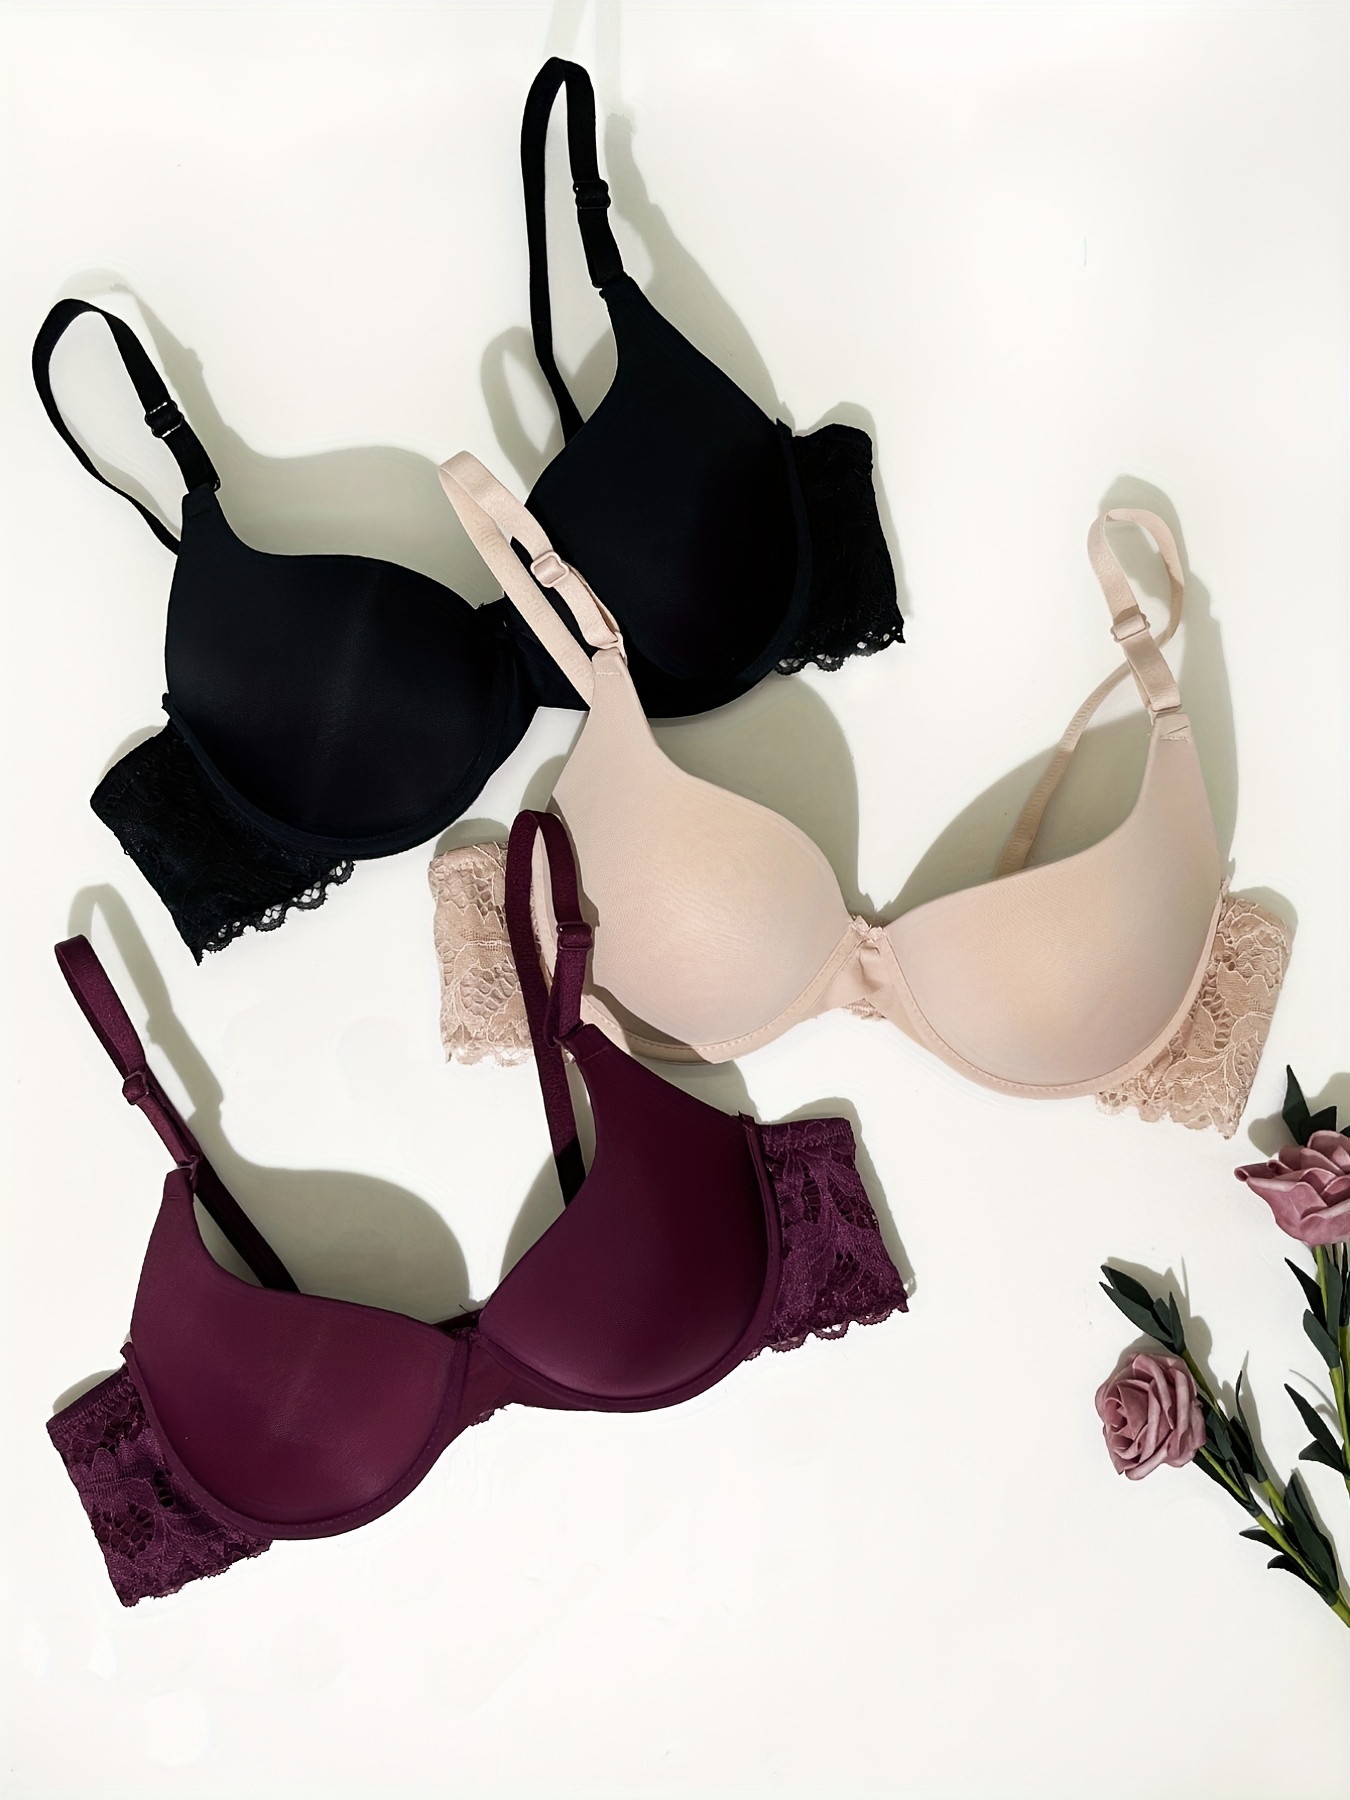 BENCH Bralette Bra in Mixed Colors